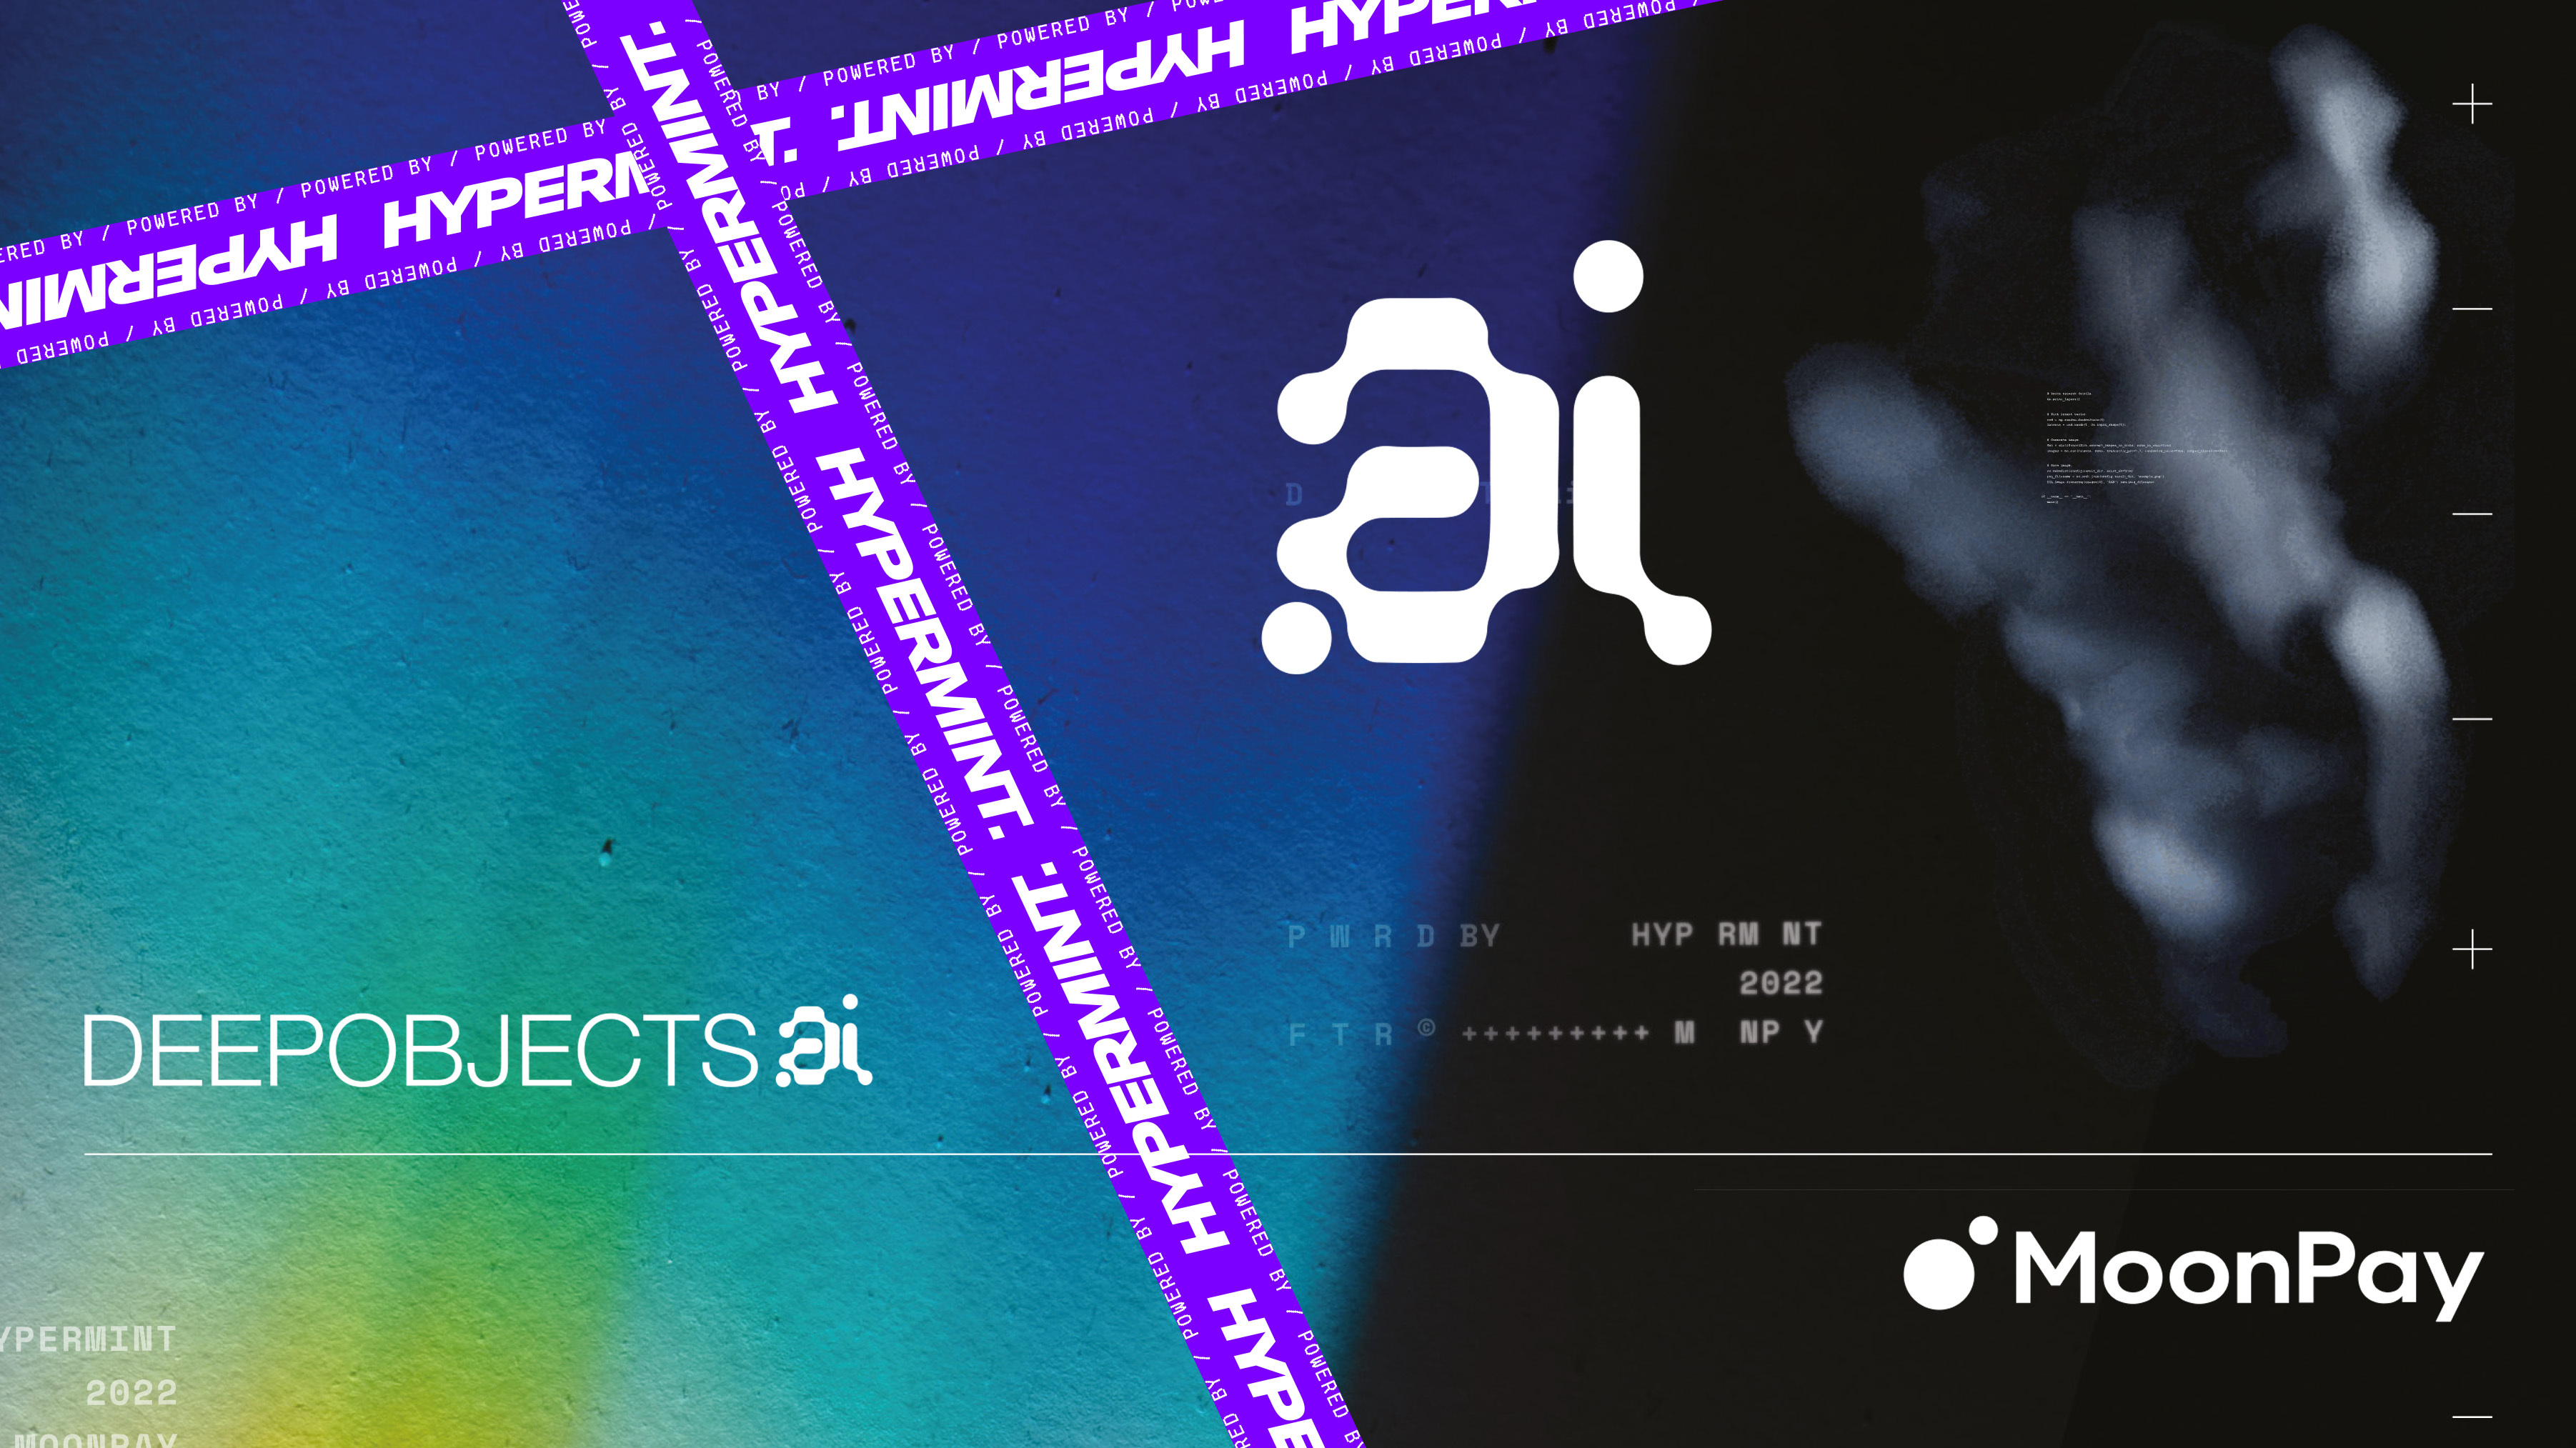 Cover image for Deep Objects uses HyperMint to launch decentralized design studio